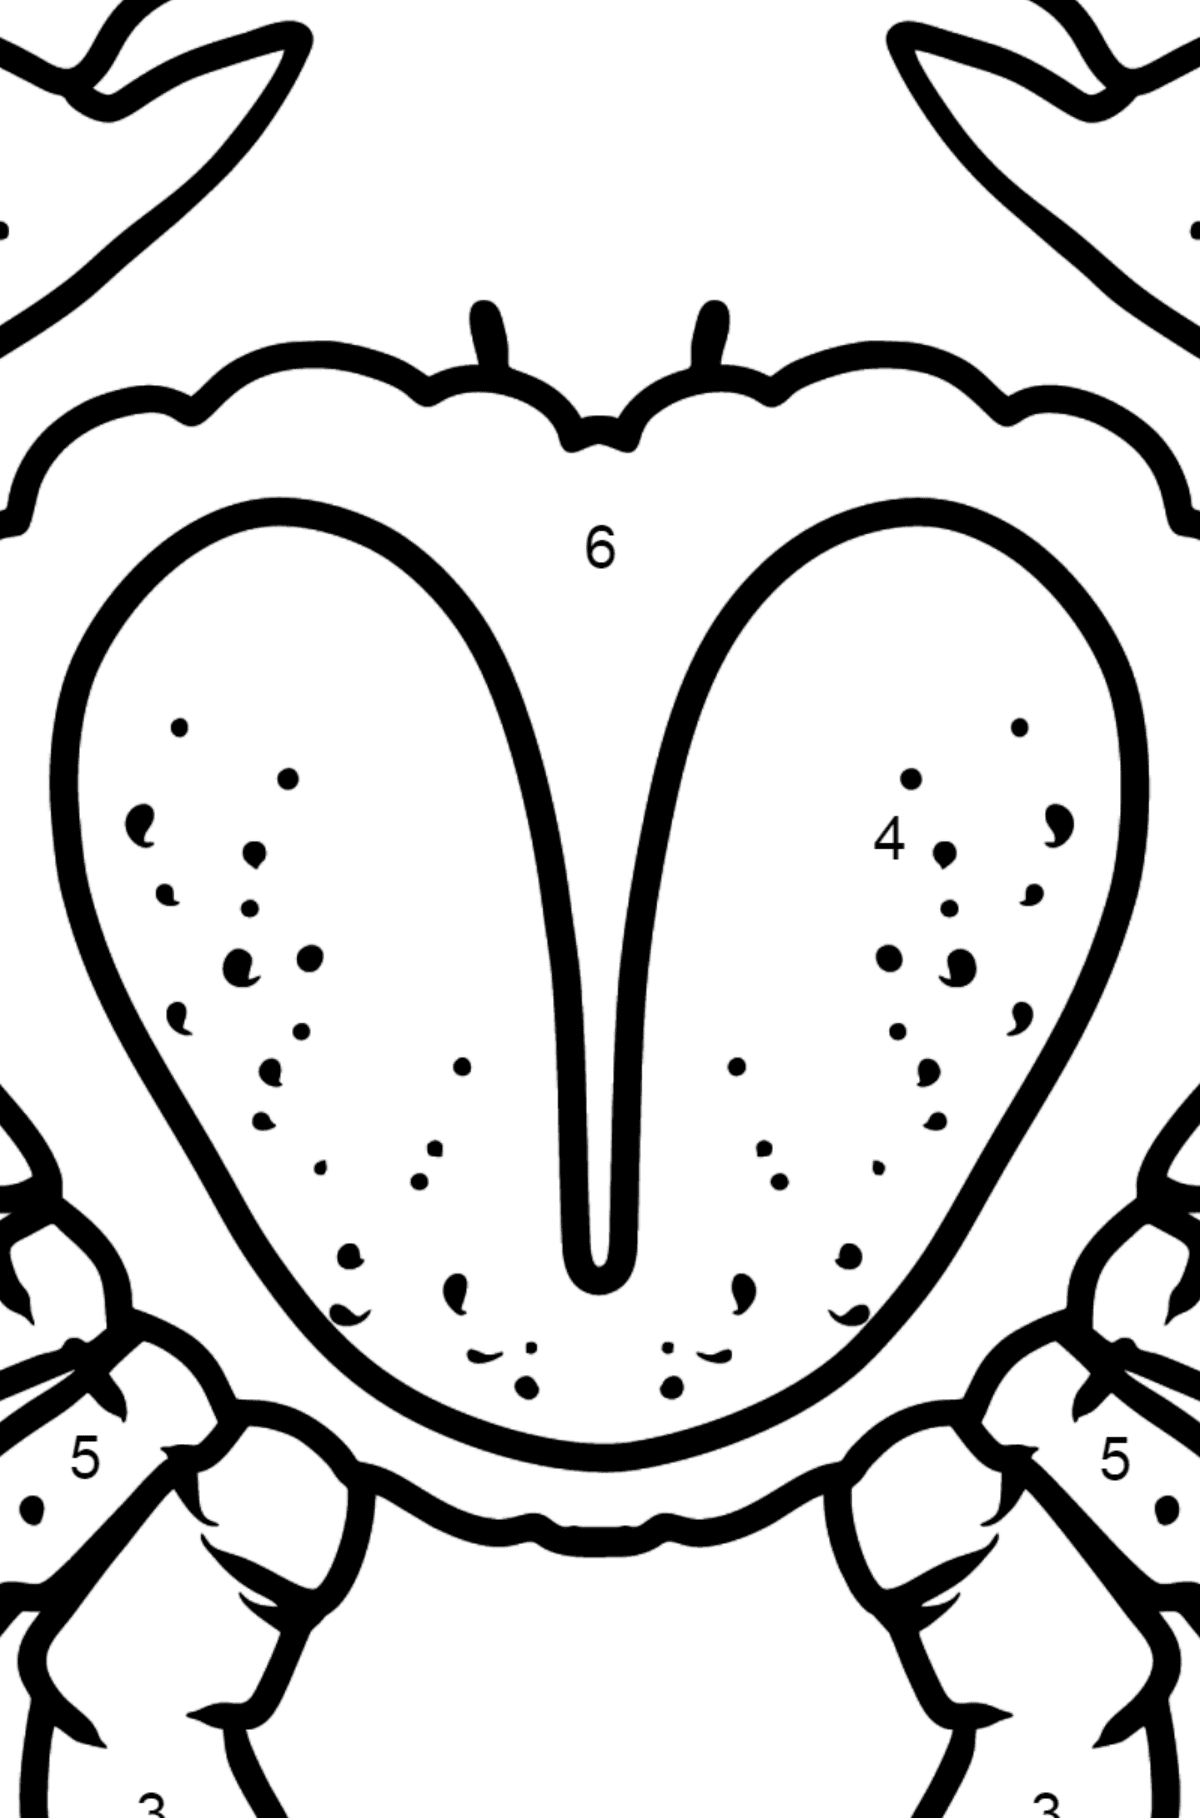 Crab coloring page - Coloring by Numbers for Kids